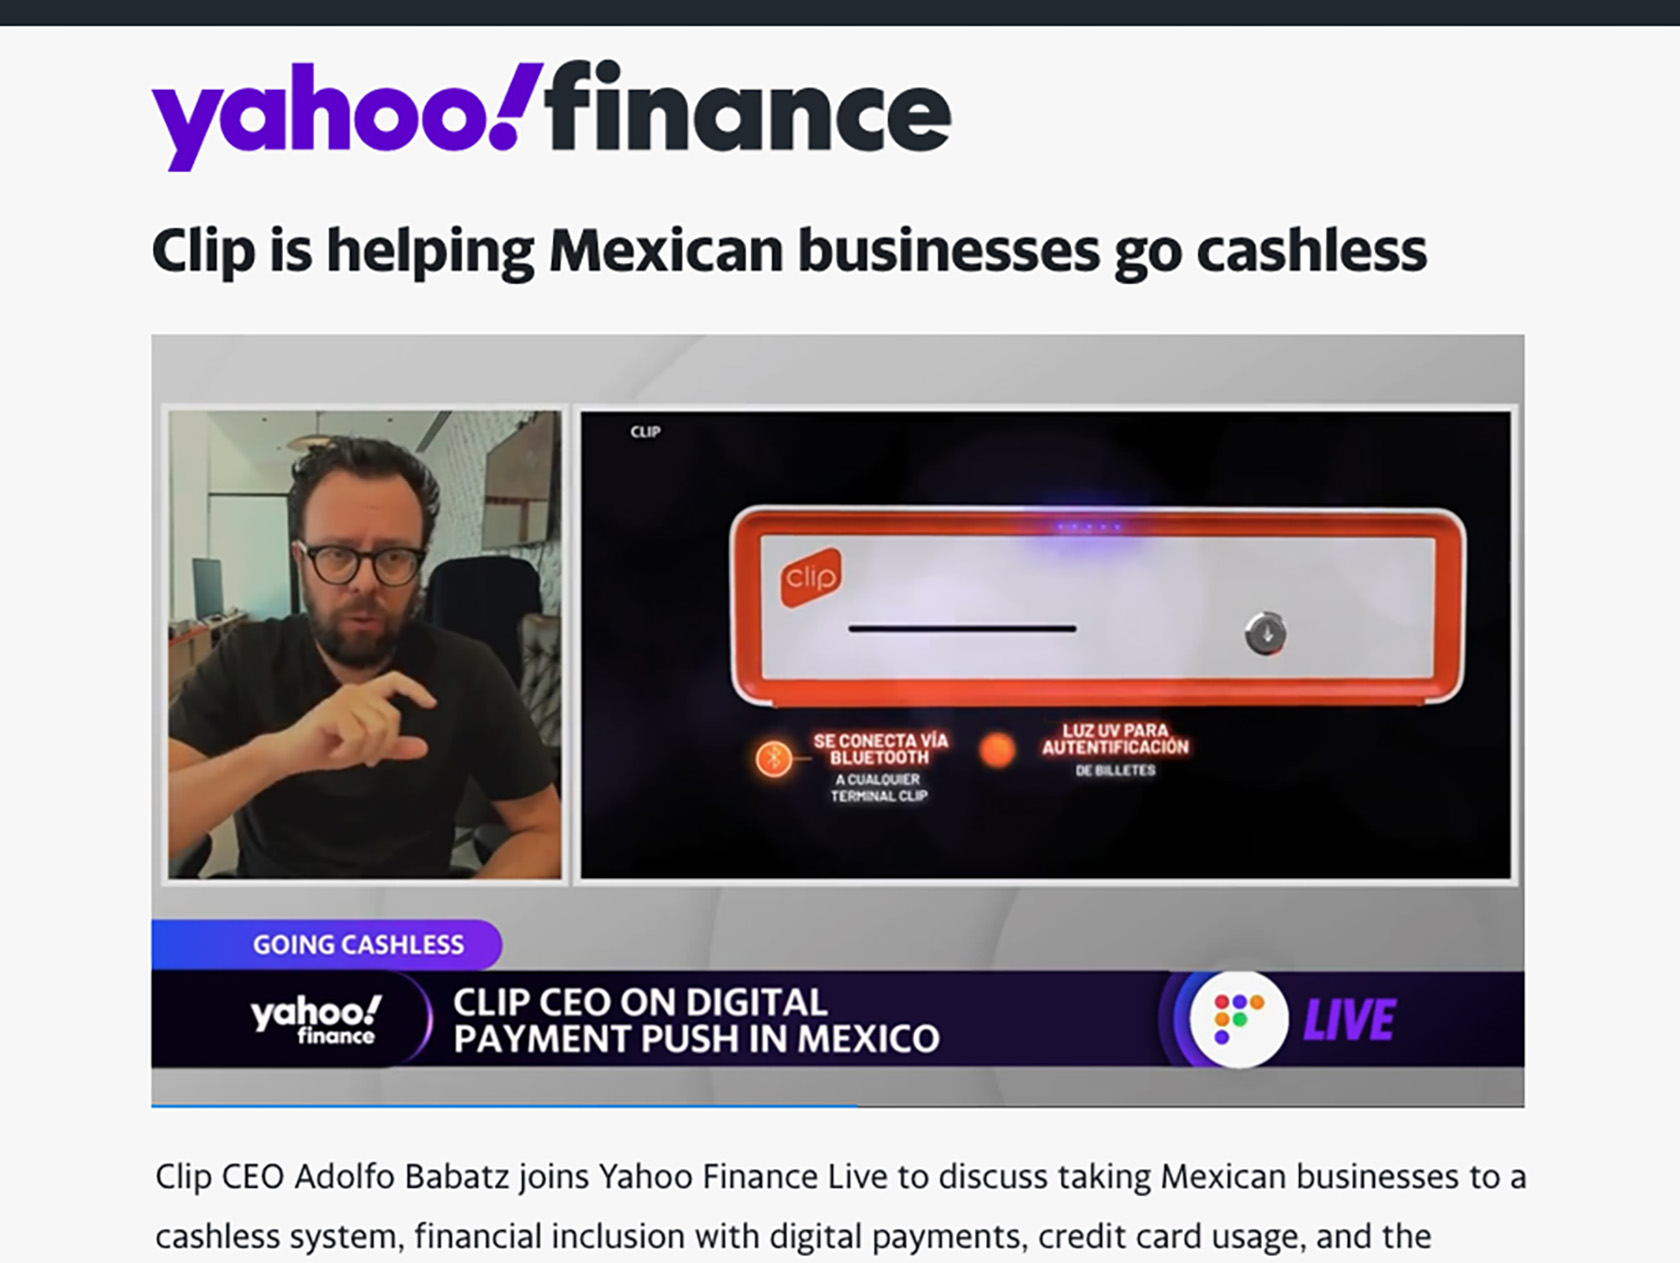 Yahoo Finance article about how Clip is helping Mexican businesses go cashless with their payment platform